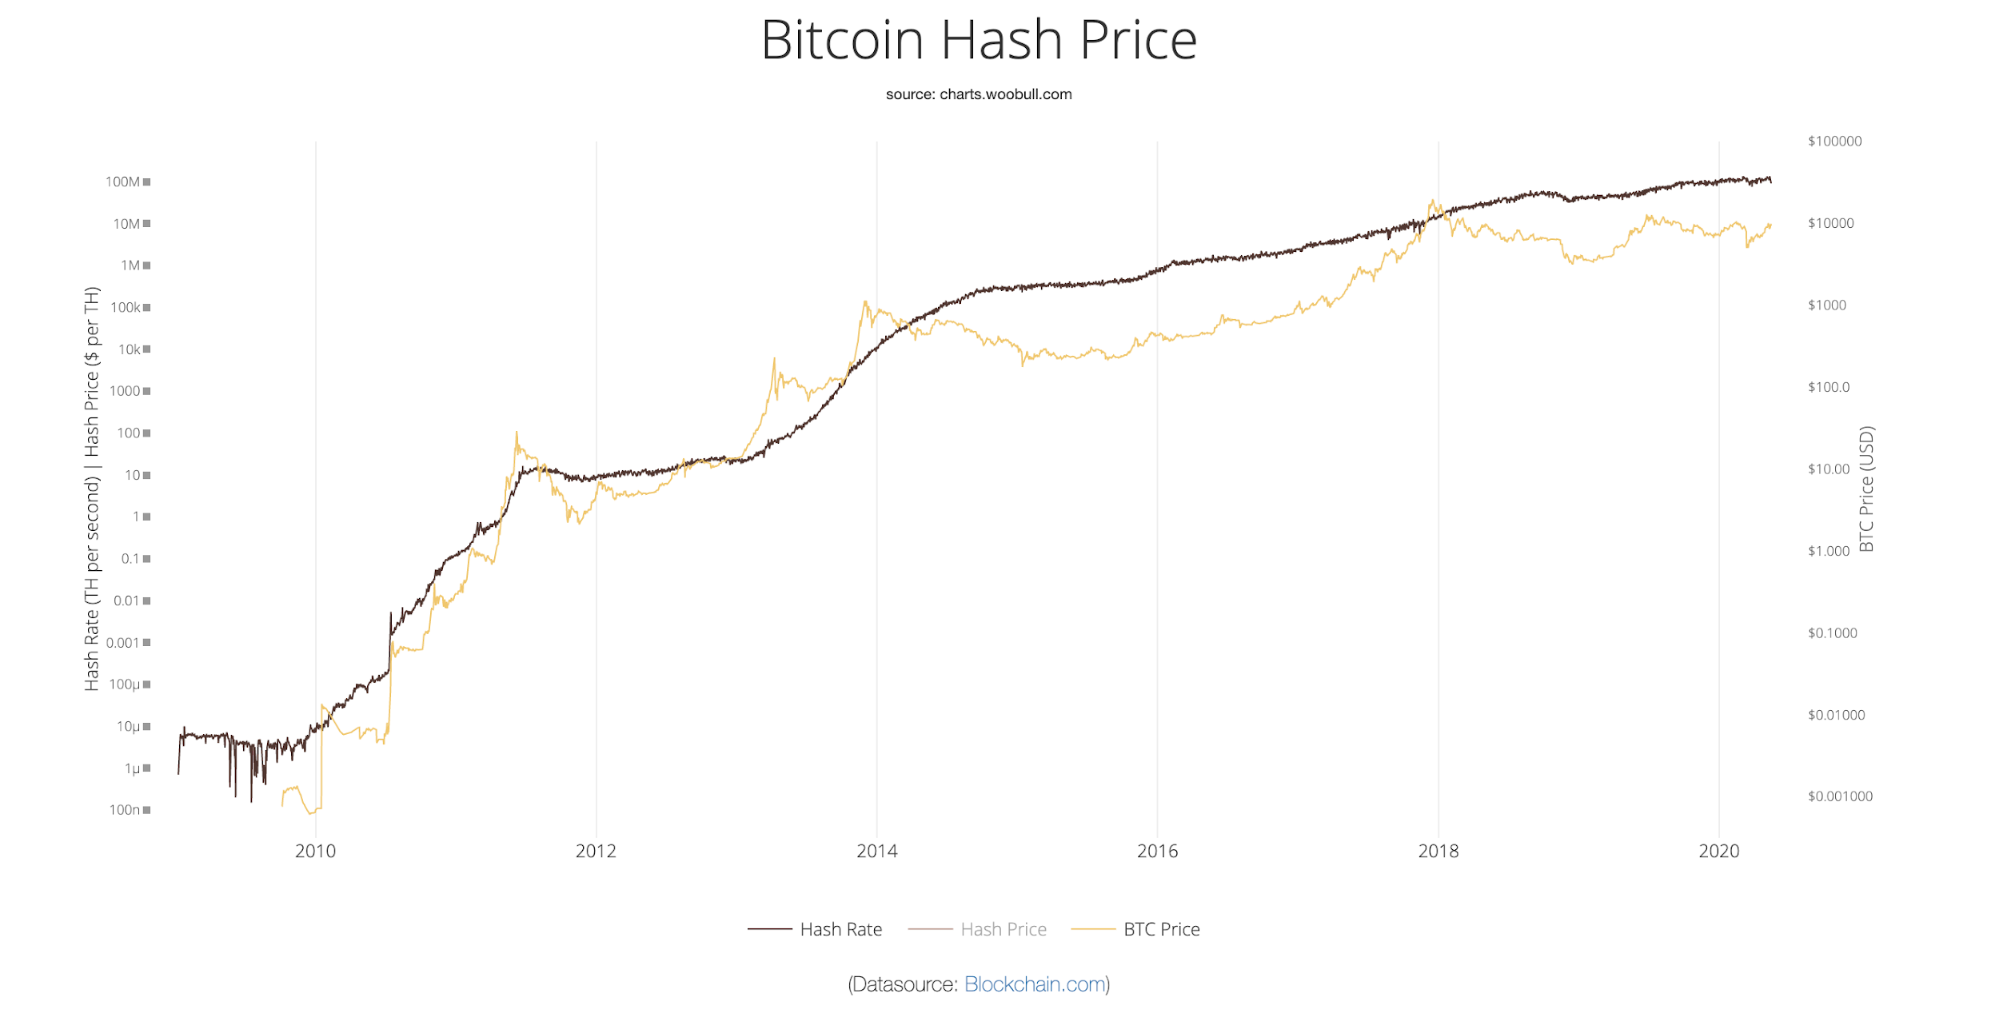 What will be the Bitcoin price after the 'halving' event?